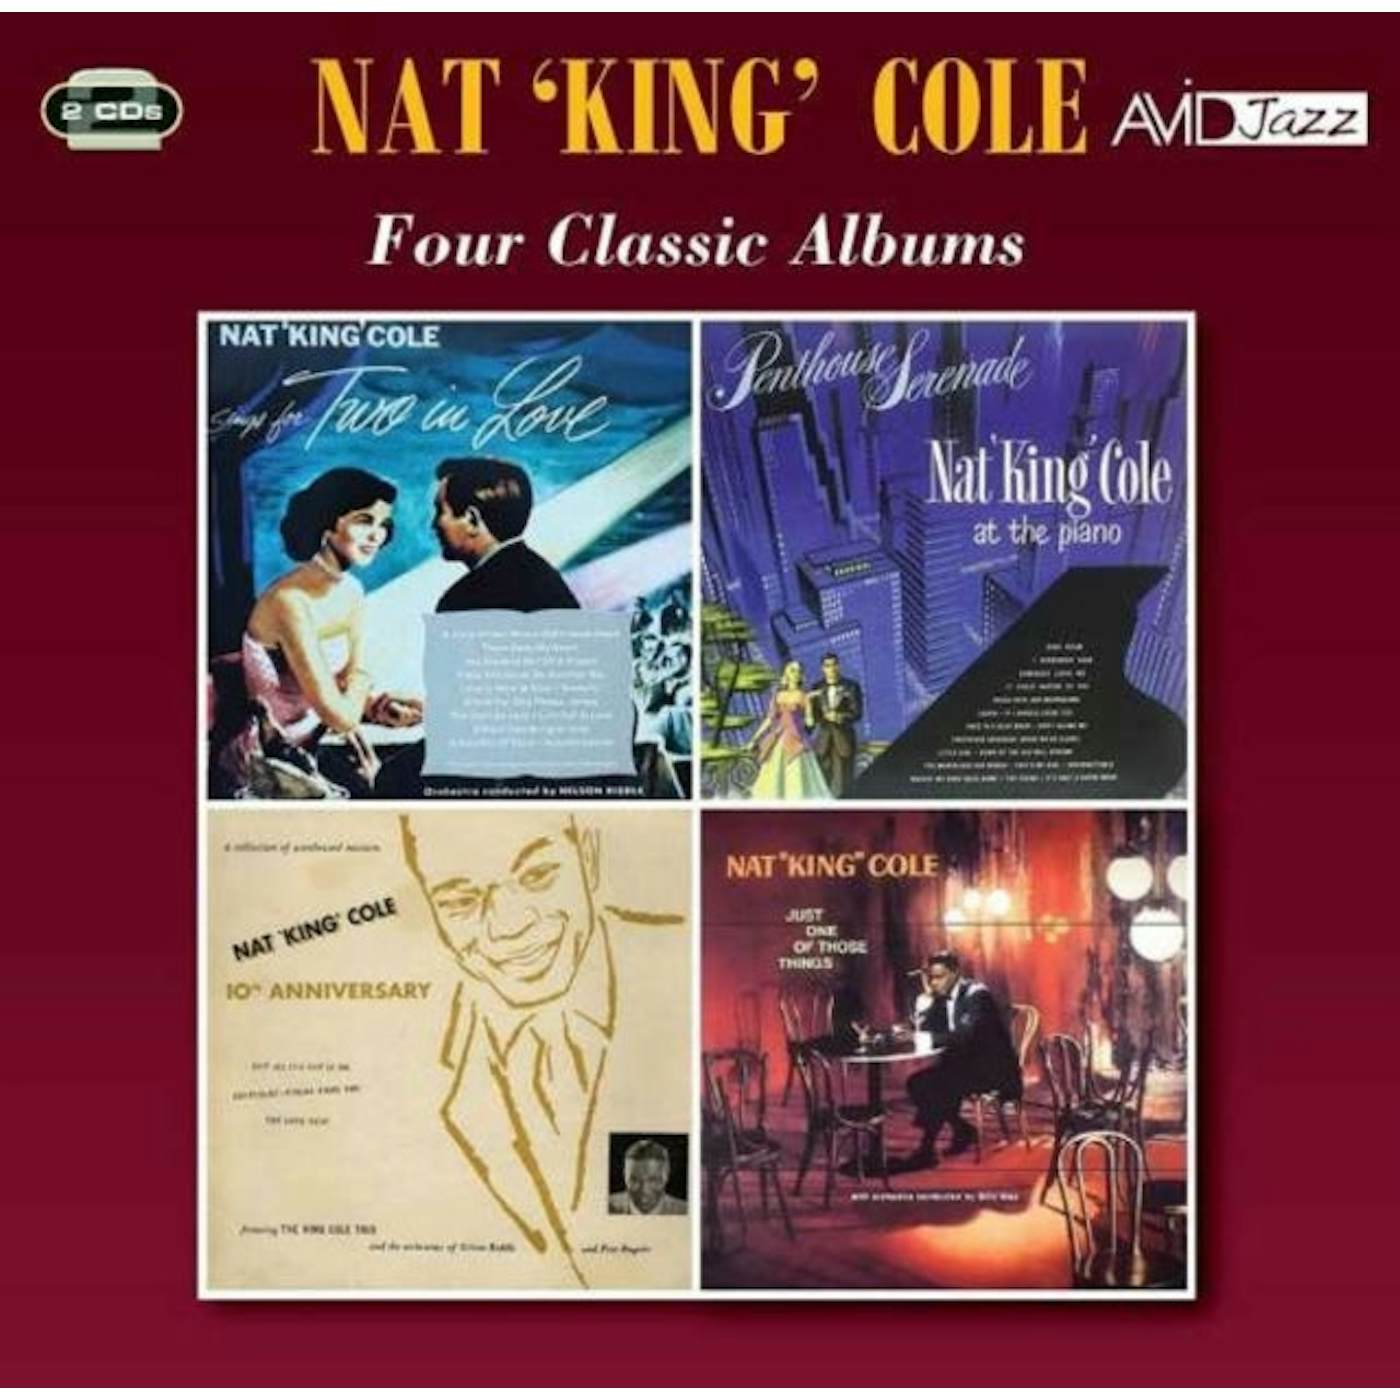 Nat King Cole CD - Four Classic Albums (Sings For Two In Love / Penthouse Serenade / 10 th Anniversary Album / Just One Of Those Things)